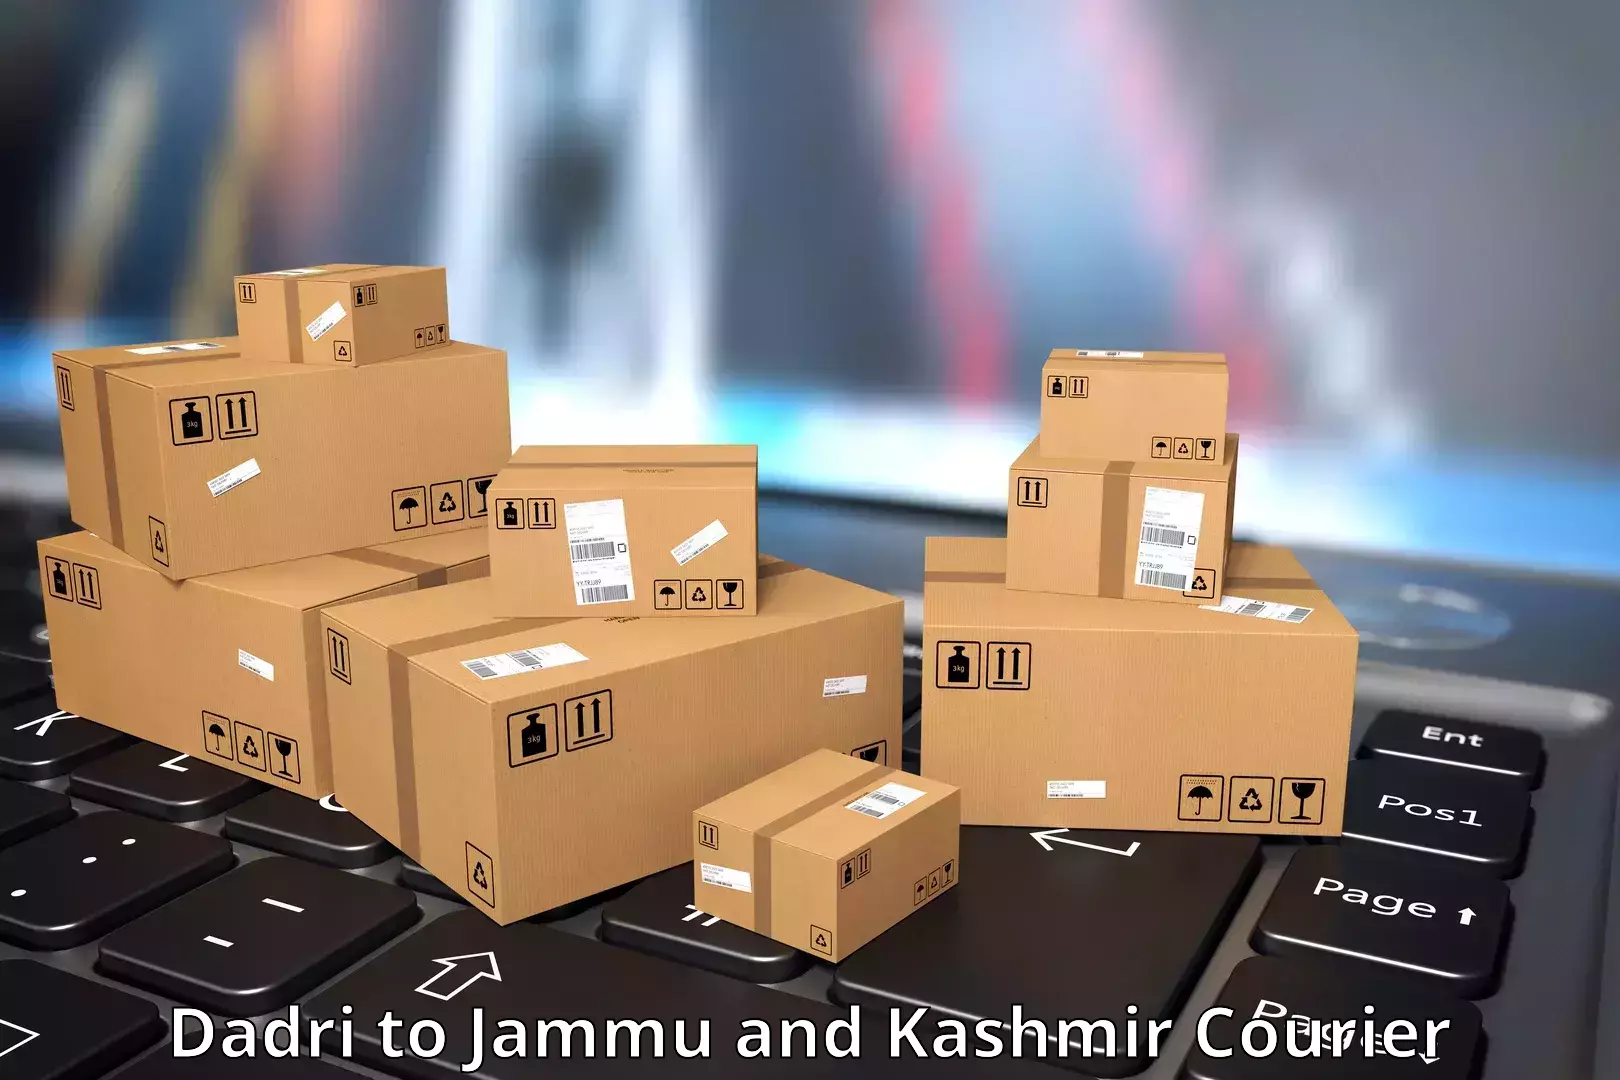 Residential courier service Dadri to Baramulla